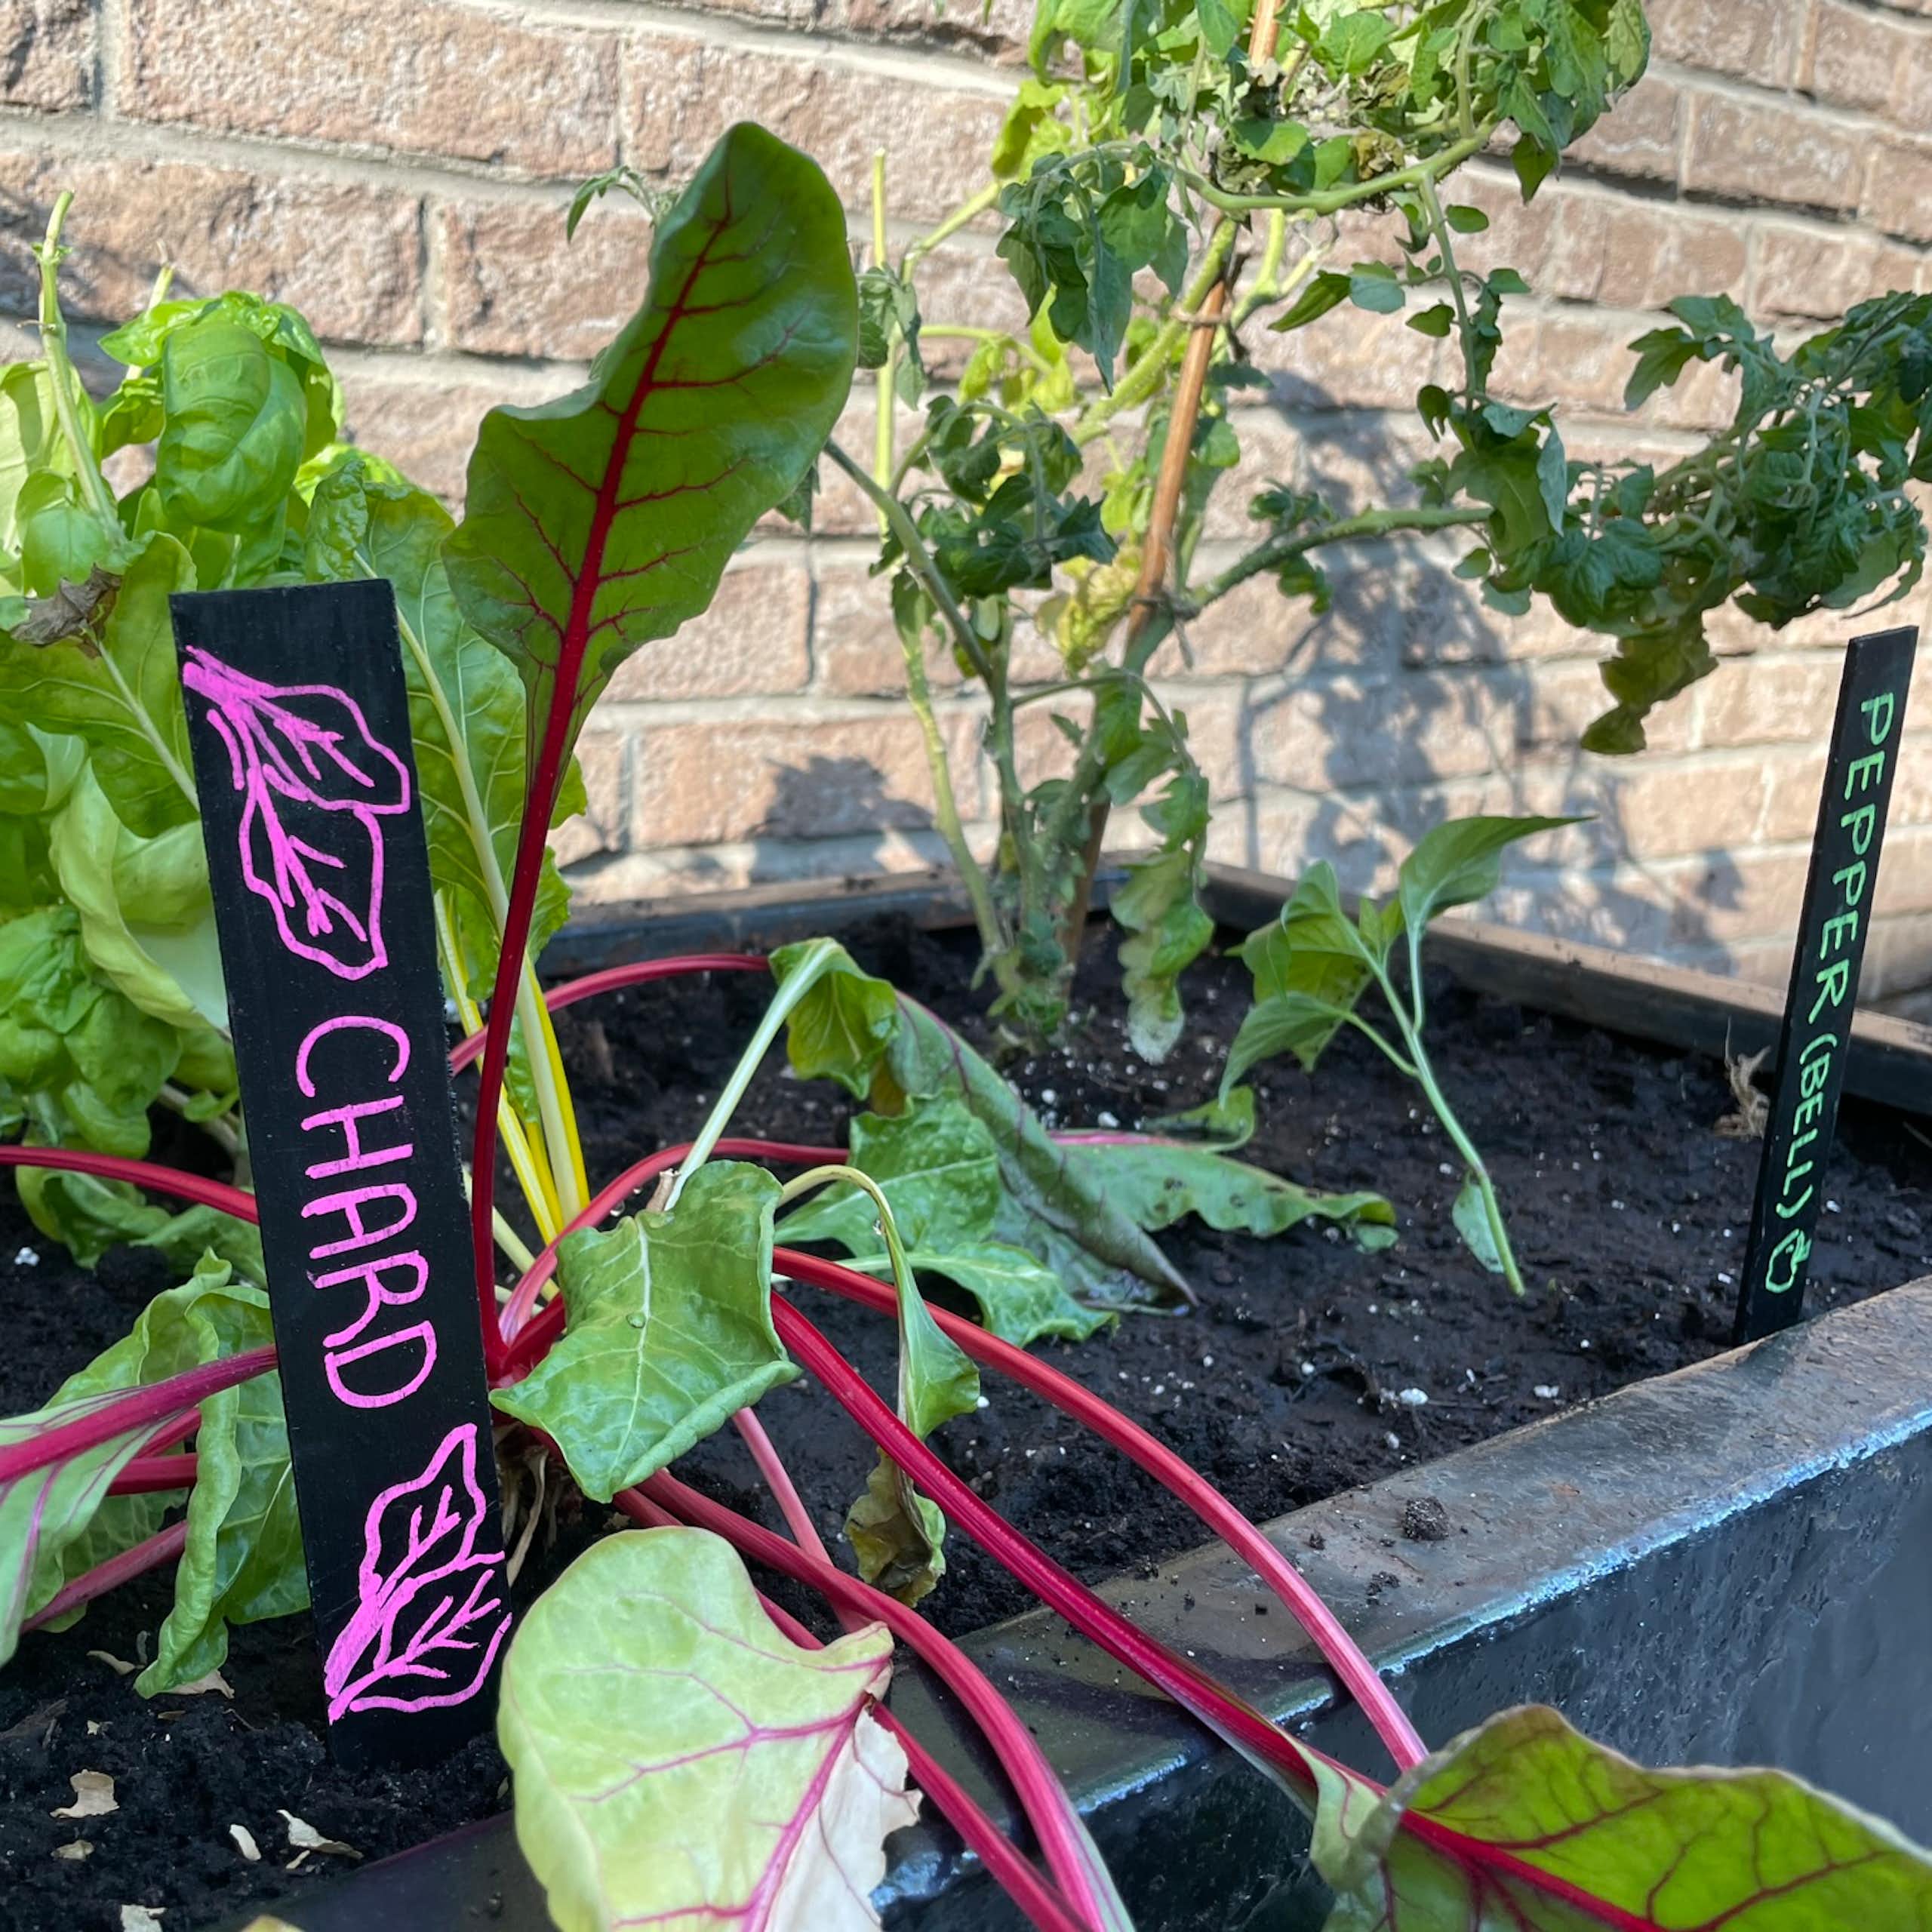 Plants seen growing in a planter bed with labels against a brick wall.